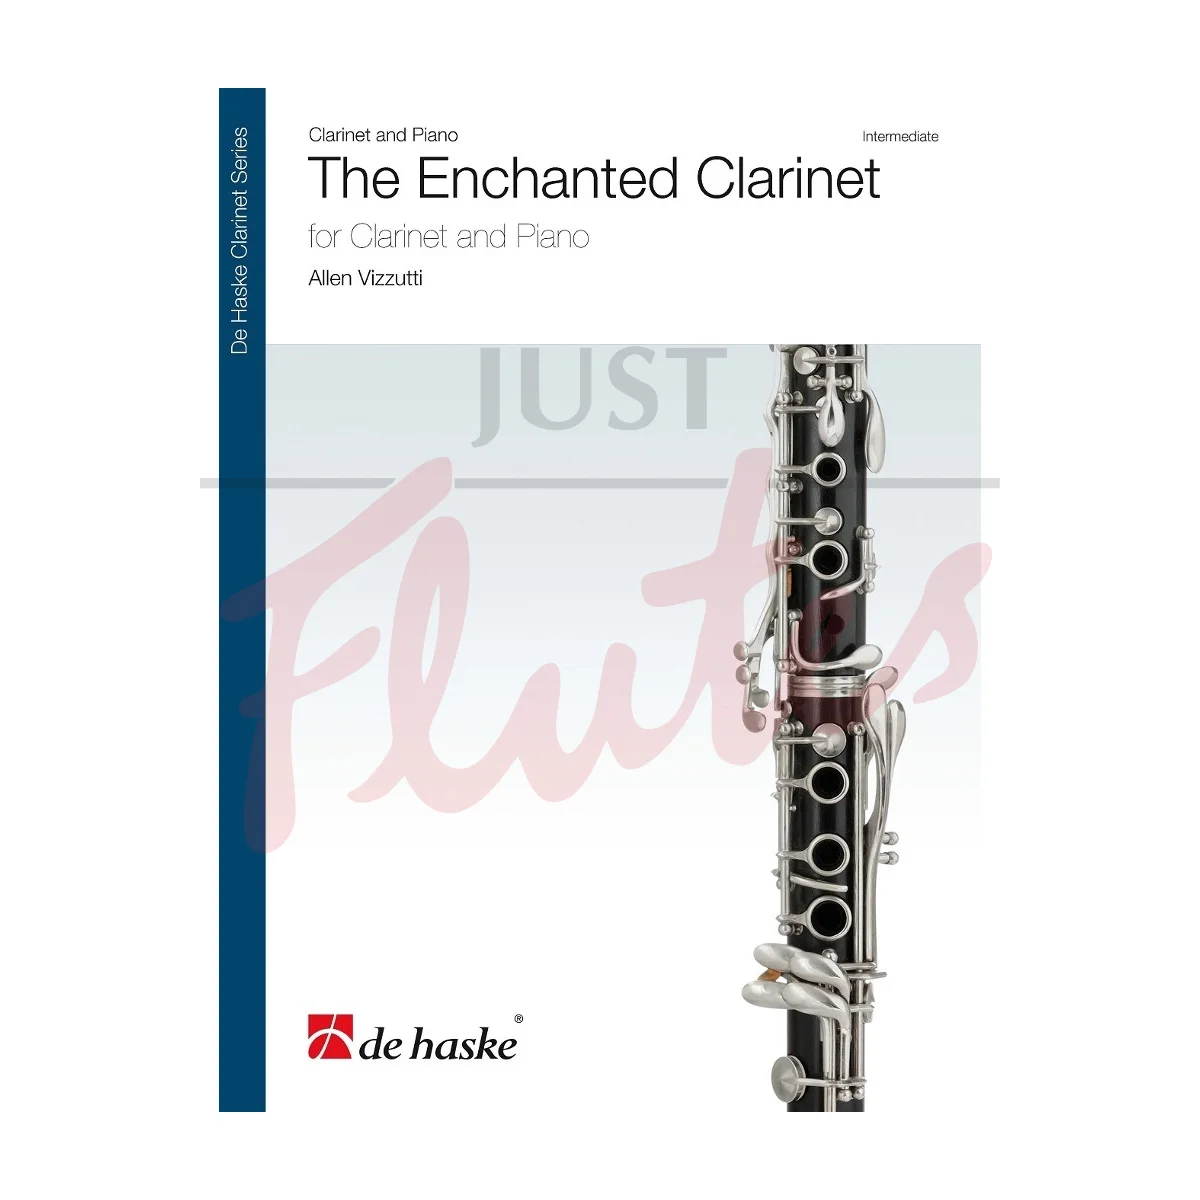 The Enchanted Clarinet for Clarinet and Piano